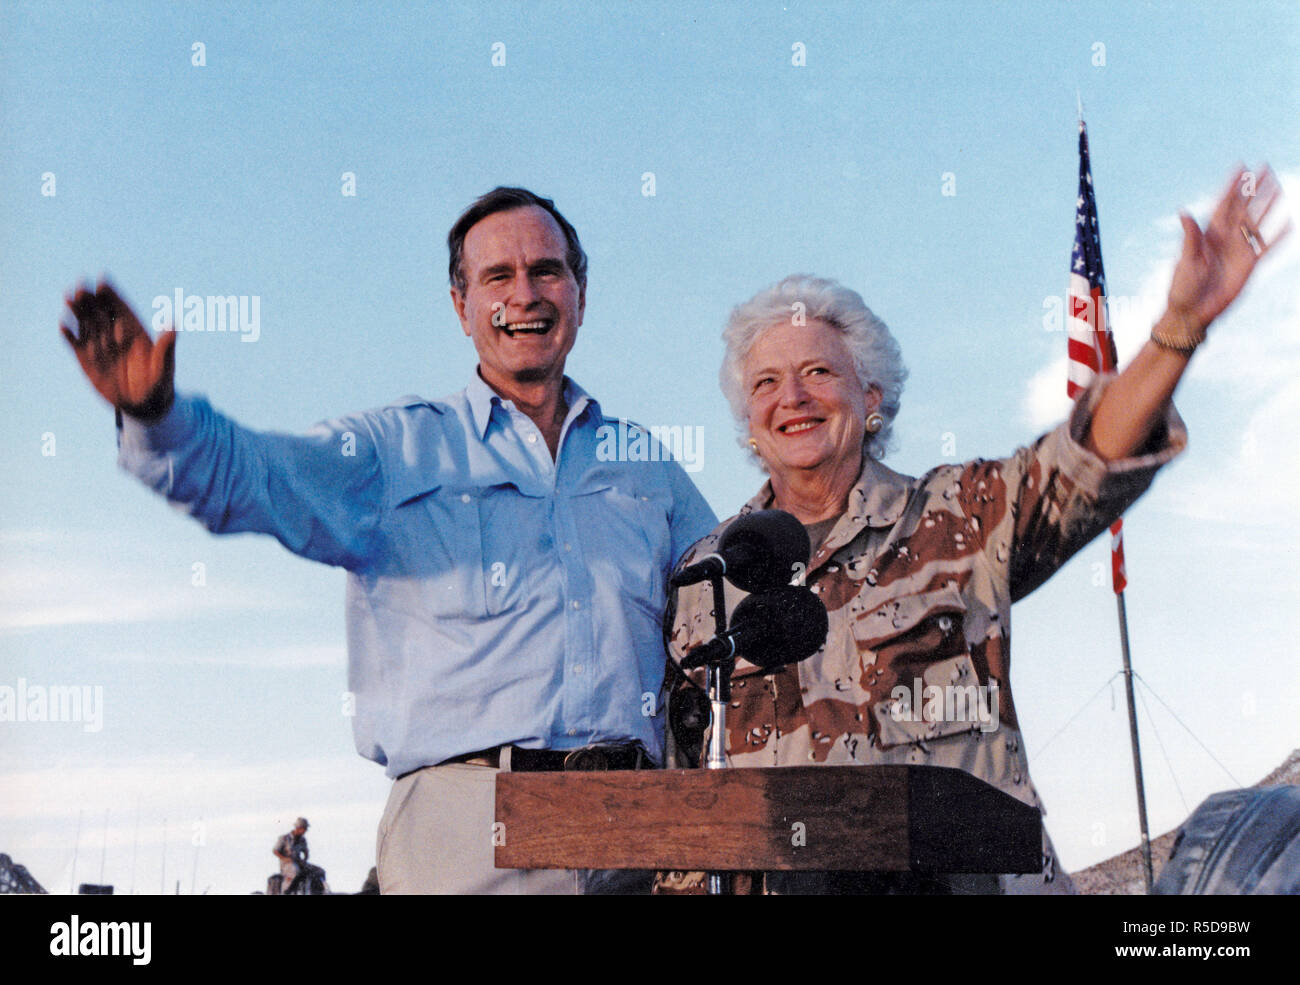 FILE: George H W Bush June 12 1924 – November 30 2018. *FILE PHOTO*30th Nov, 2018. George H.W. Bush, a patrician New Englander whose presidency soared with the coalition victory over Iraq in Kuwait, but then plummeted in the throes of a weak economy that led voters to turn him out of office after a single term, has died. He was 94. Pictured: January 22, 1990 - Saudi Arabia - President GEORGE H.W. BUSH and first lady BARBARA BUSH visit US military personnel on Thanksgiving in Saudi Arabia on November 22, 1990. Credit: Ed Bailey/DOD/CNP/ZUMA Wire/Alamy Live News Credit: ZUMA Press, Inc./Alamy Li Stock Photo